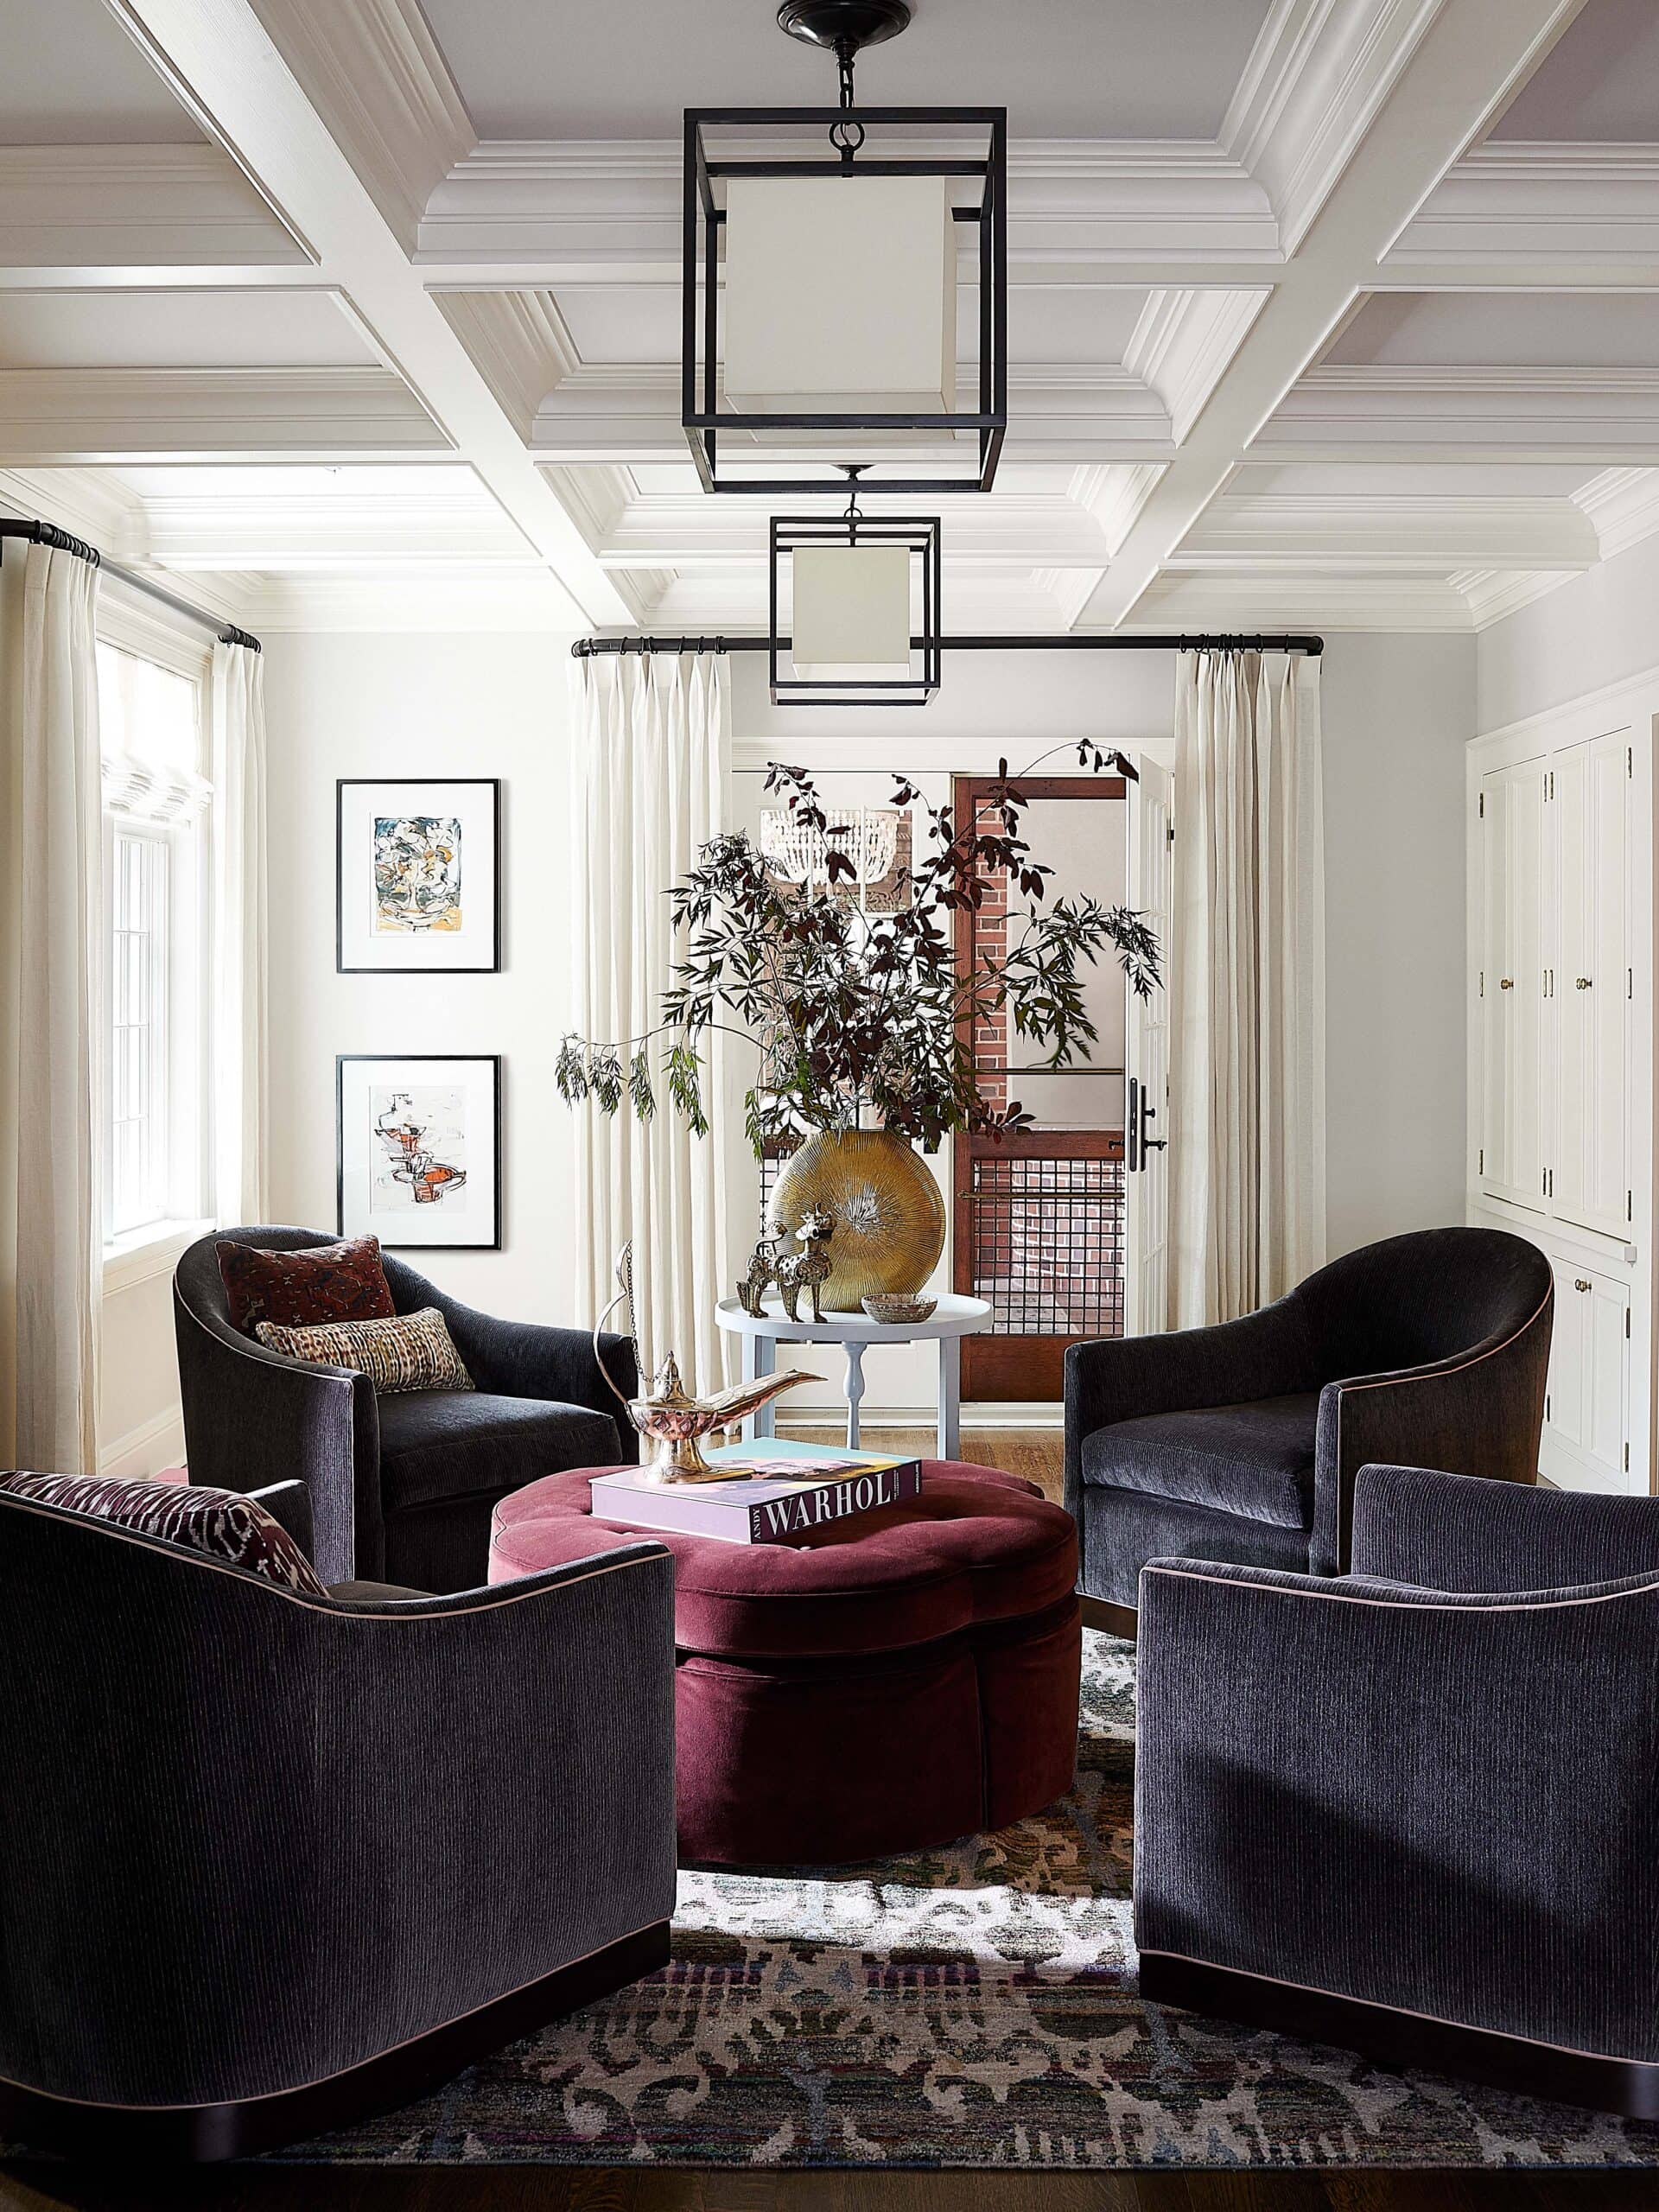 eclectic interior design style sitting area with classic velvet chairs